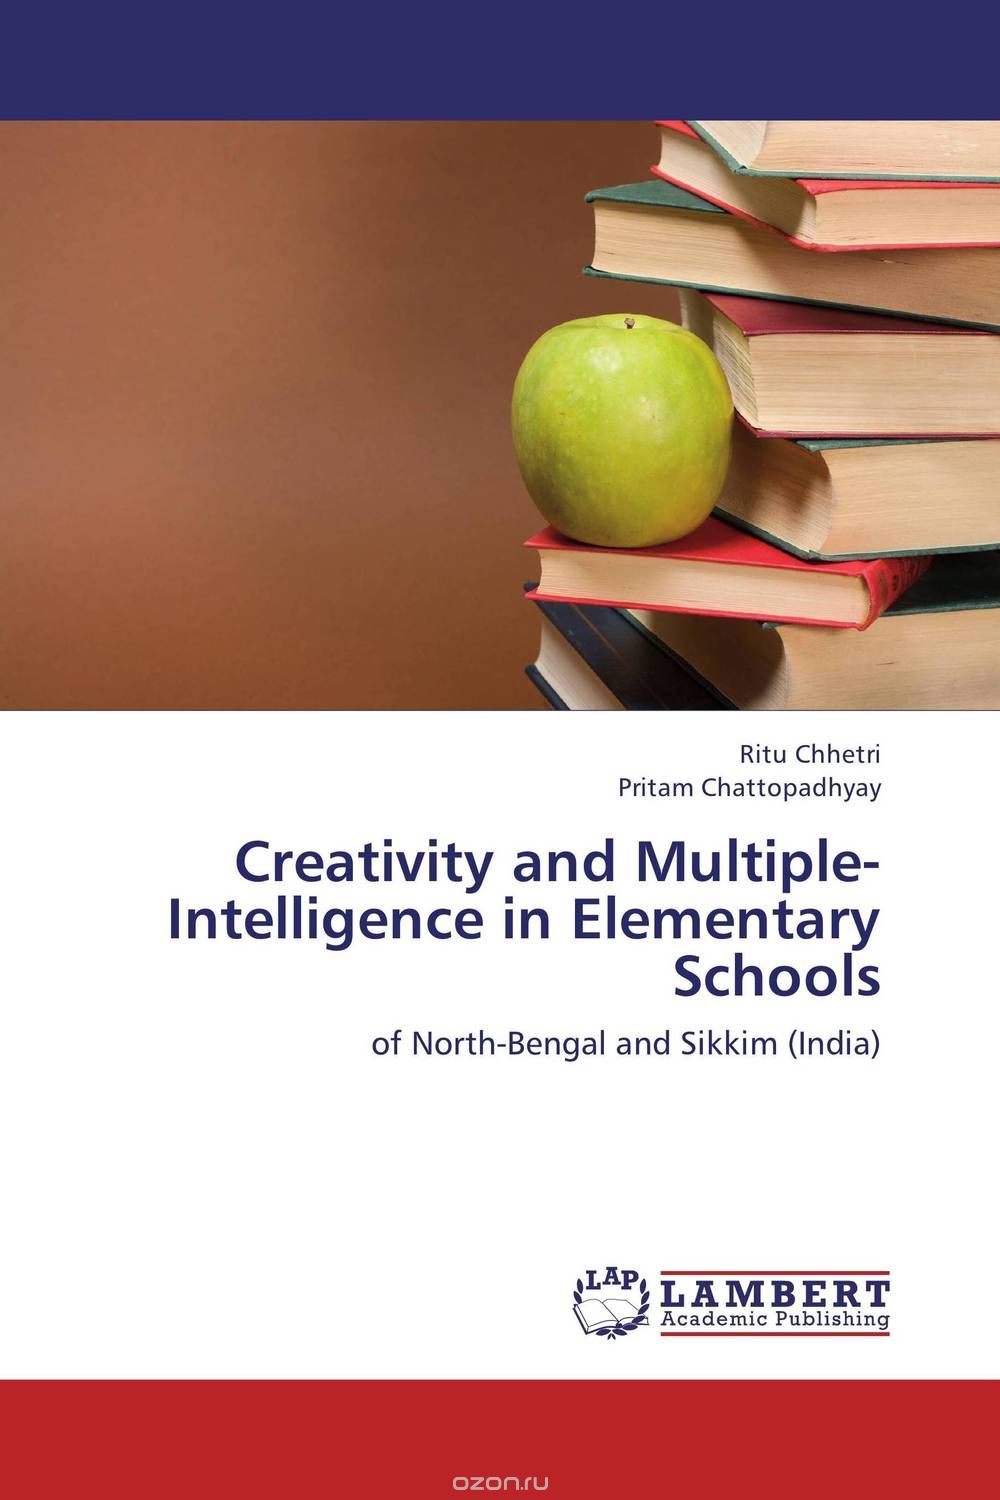 Creativity and Multiple-Intelligence in Elementary Schools